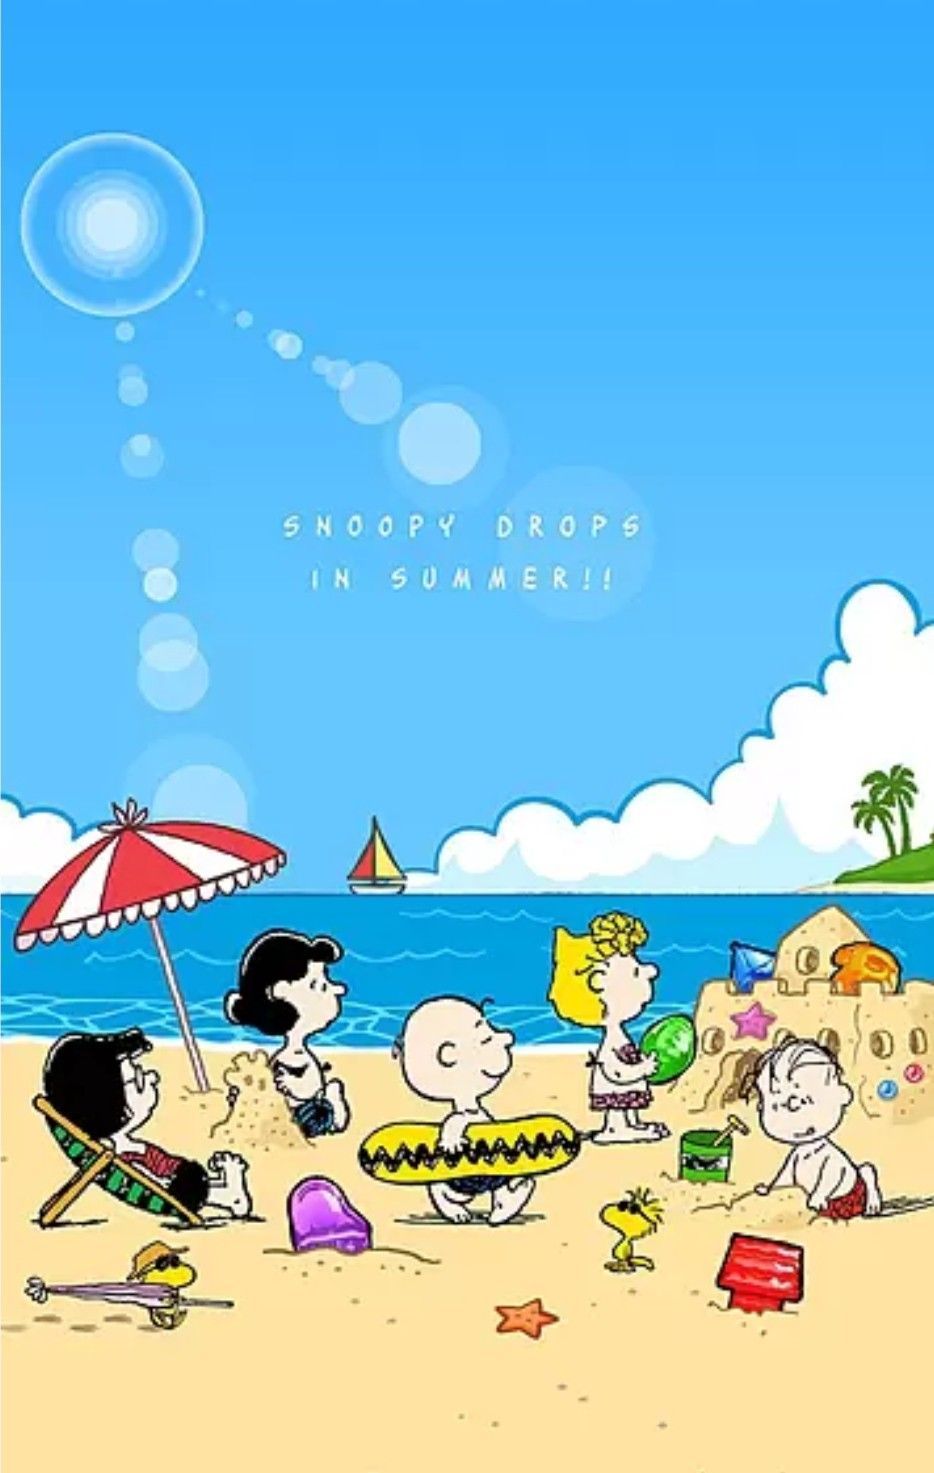 Snoopy Summer Wallpaper Free Snoopy Summer Background